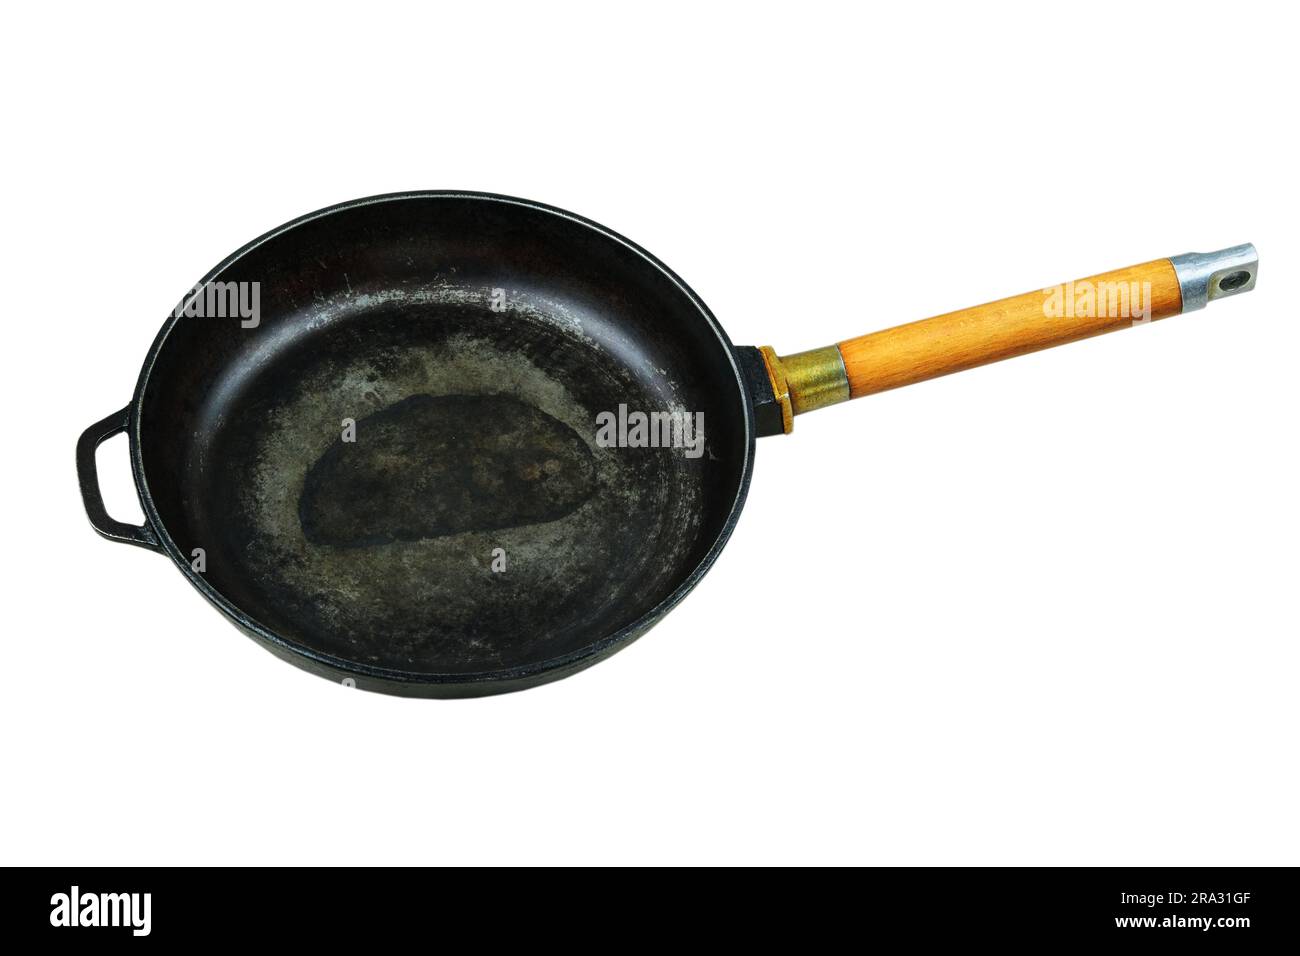 Cast iron pan. Pan was used. Kitchenware isolated on white background. Stock Photo